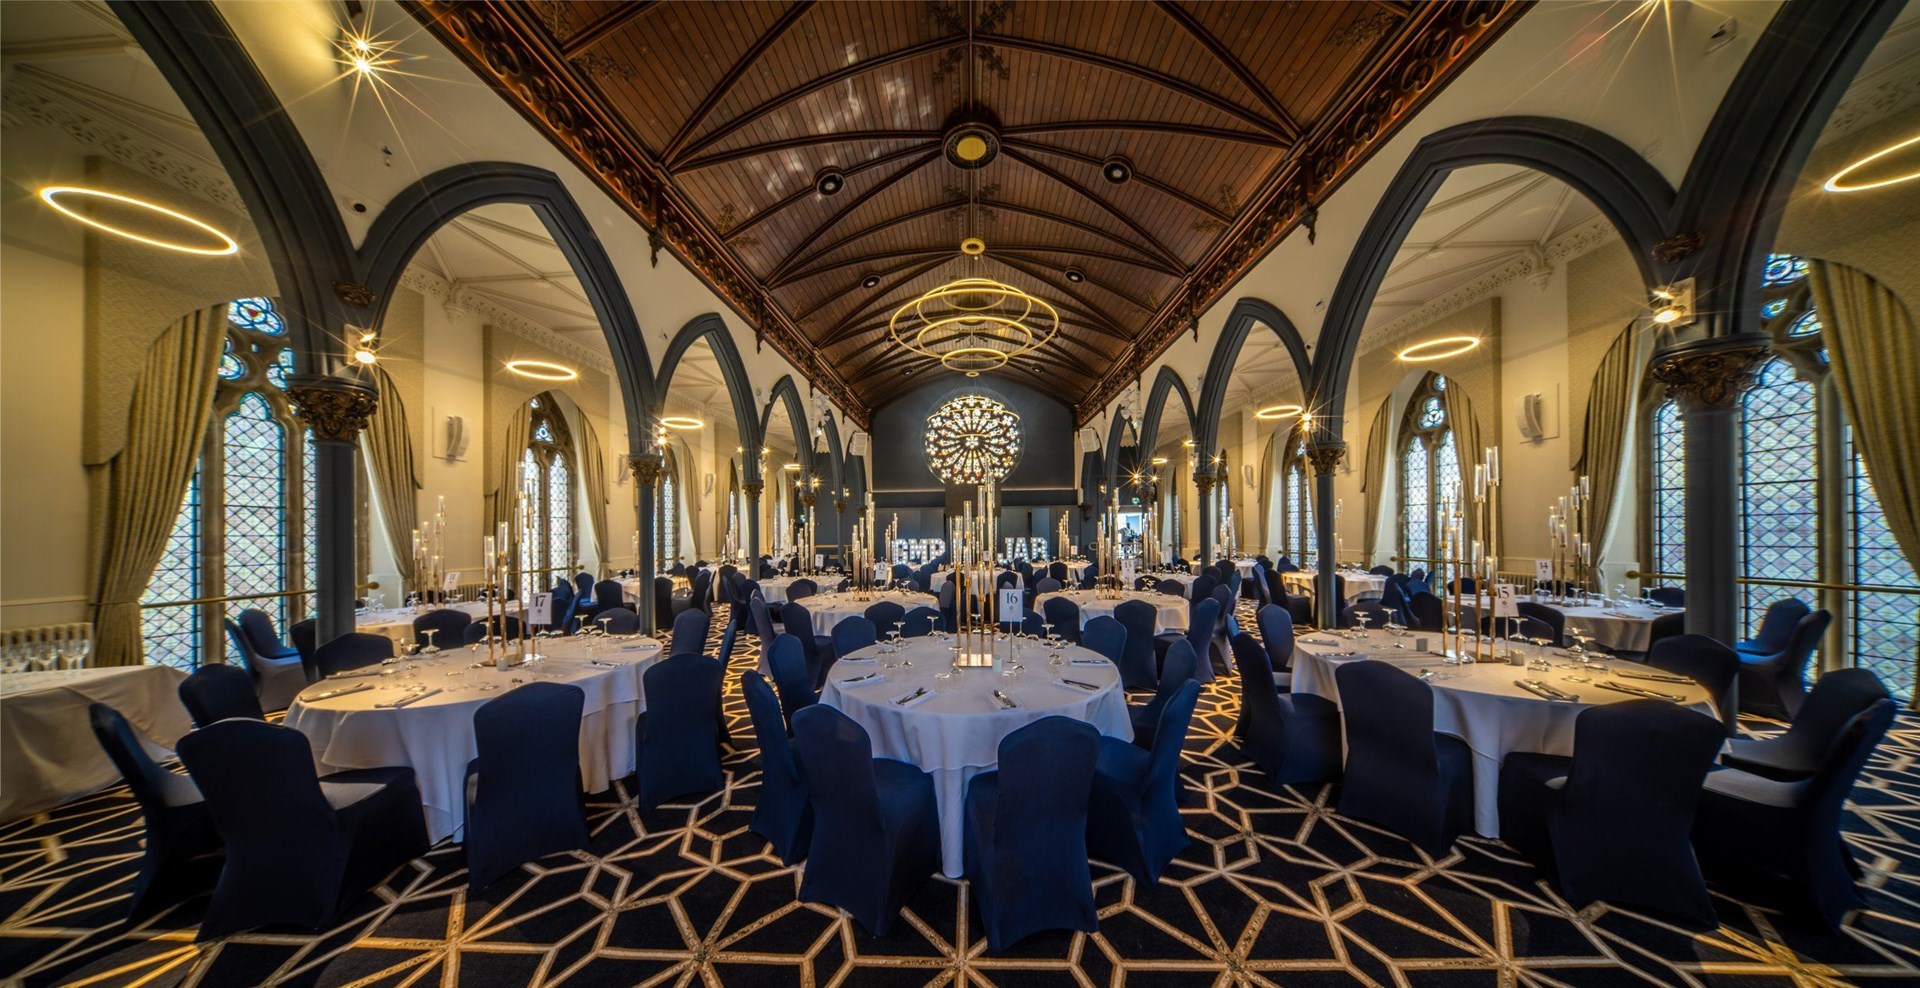 The fundraising ball will be held in the Union Kirk in Aberdeen.